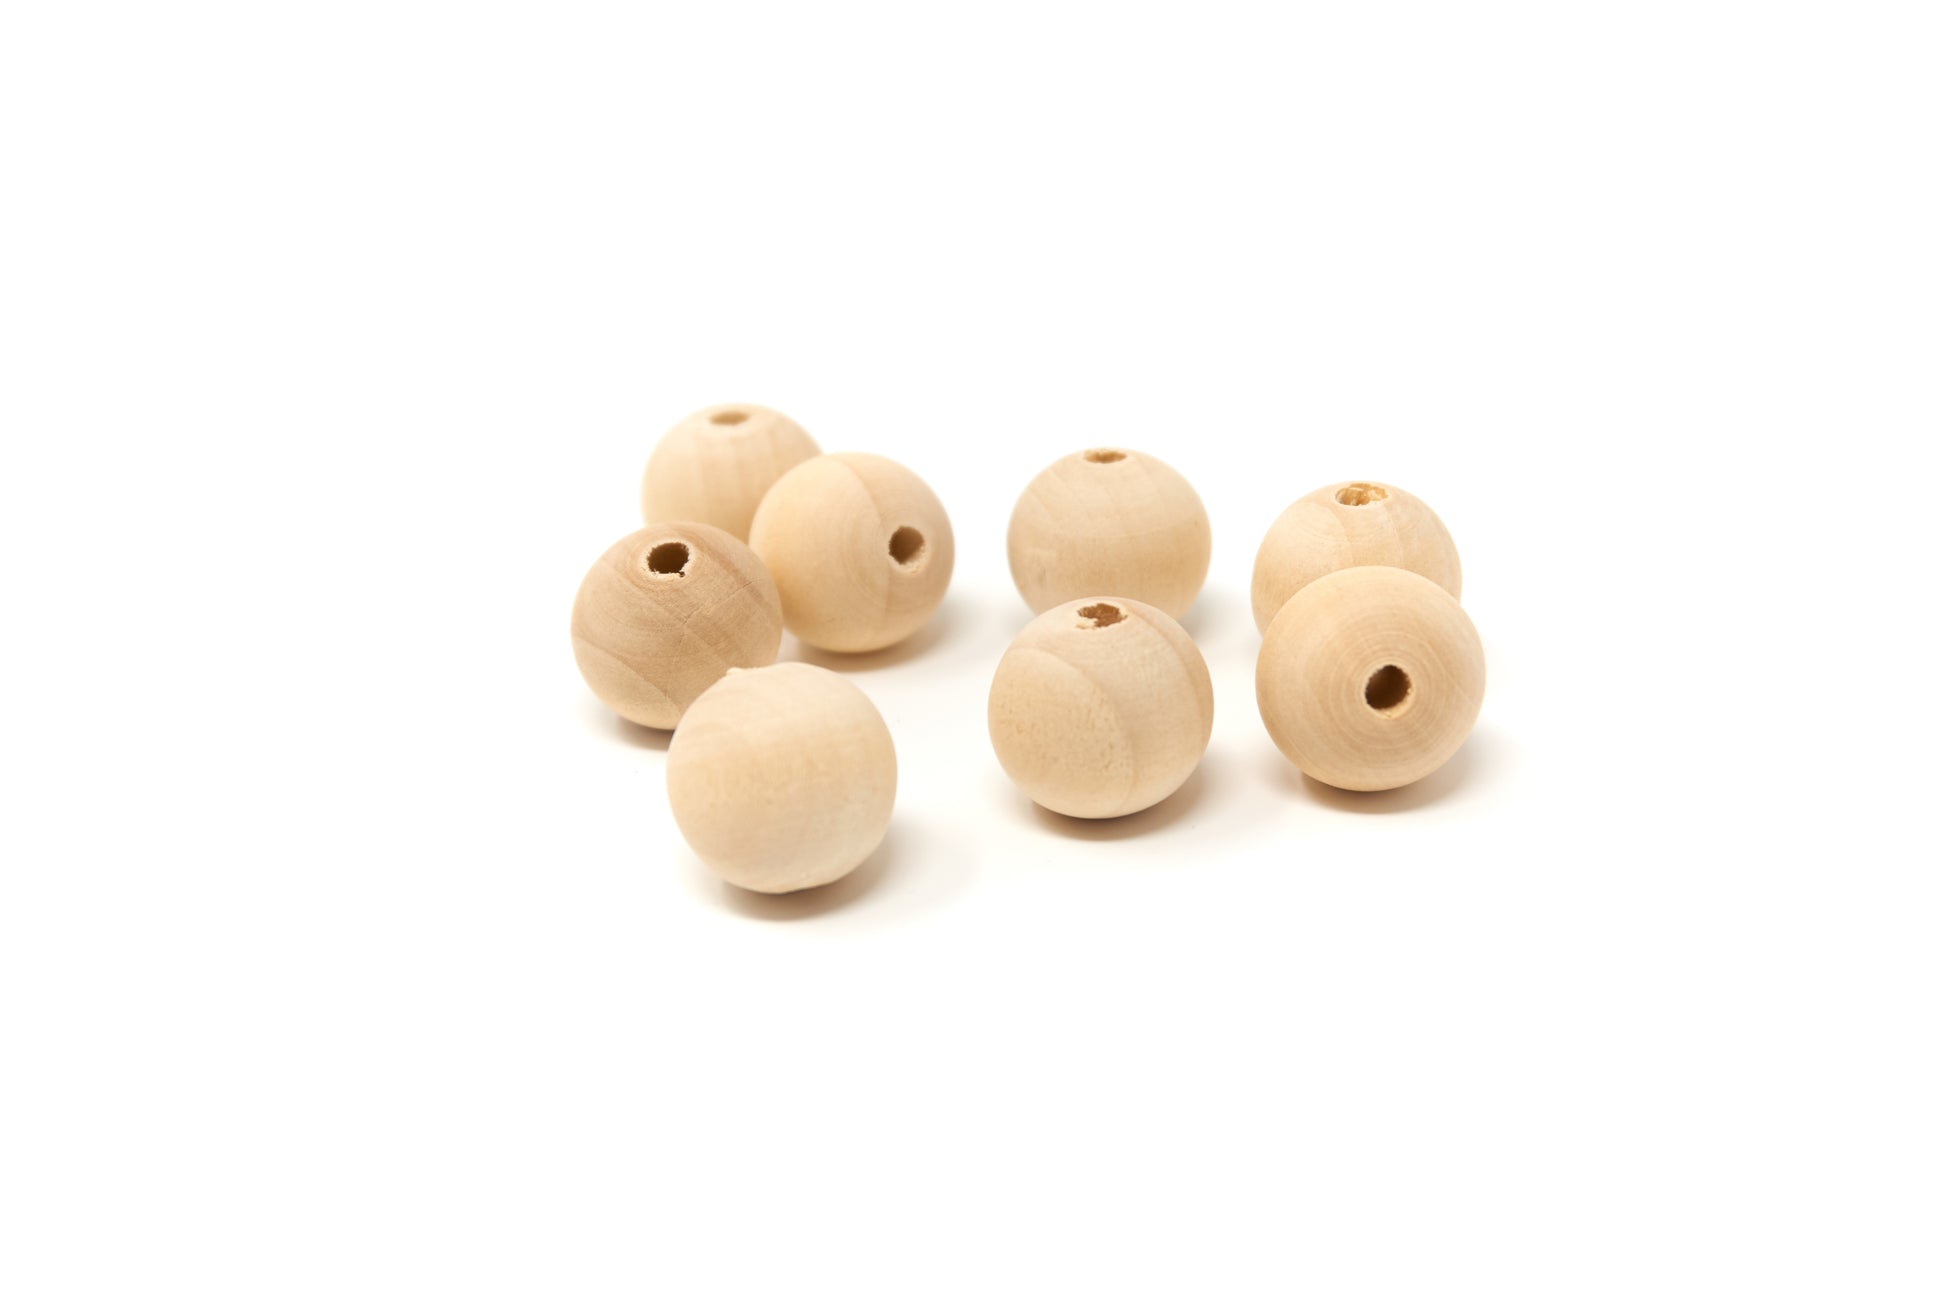 Natural Round Wood Beads 20mm 100 pieces - Cameos Art Shop